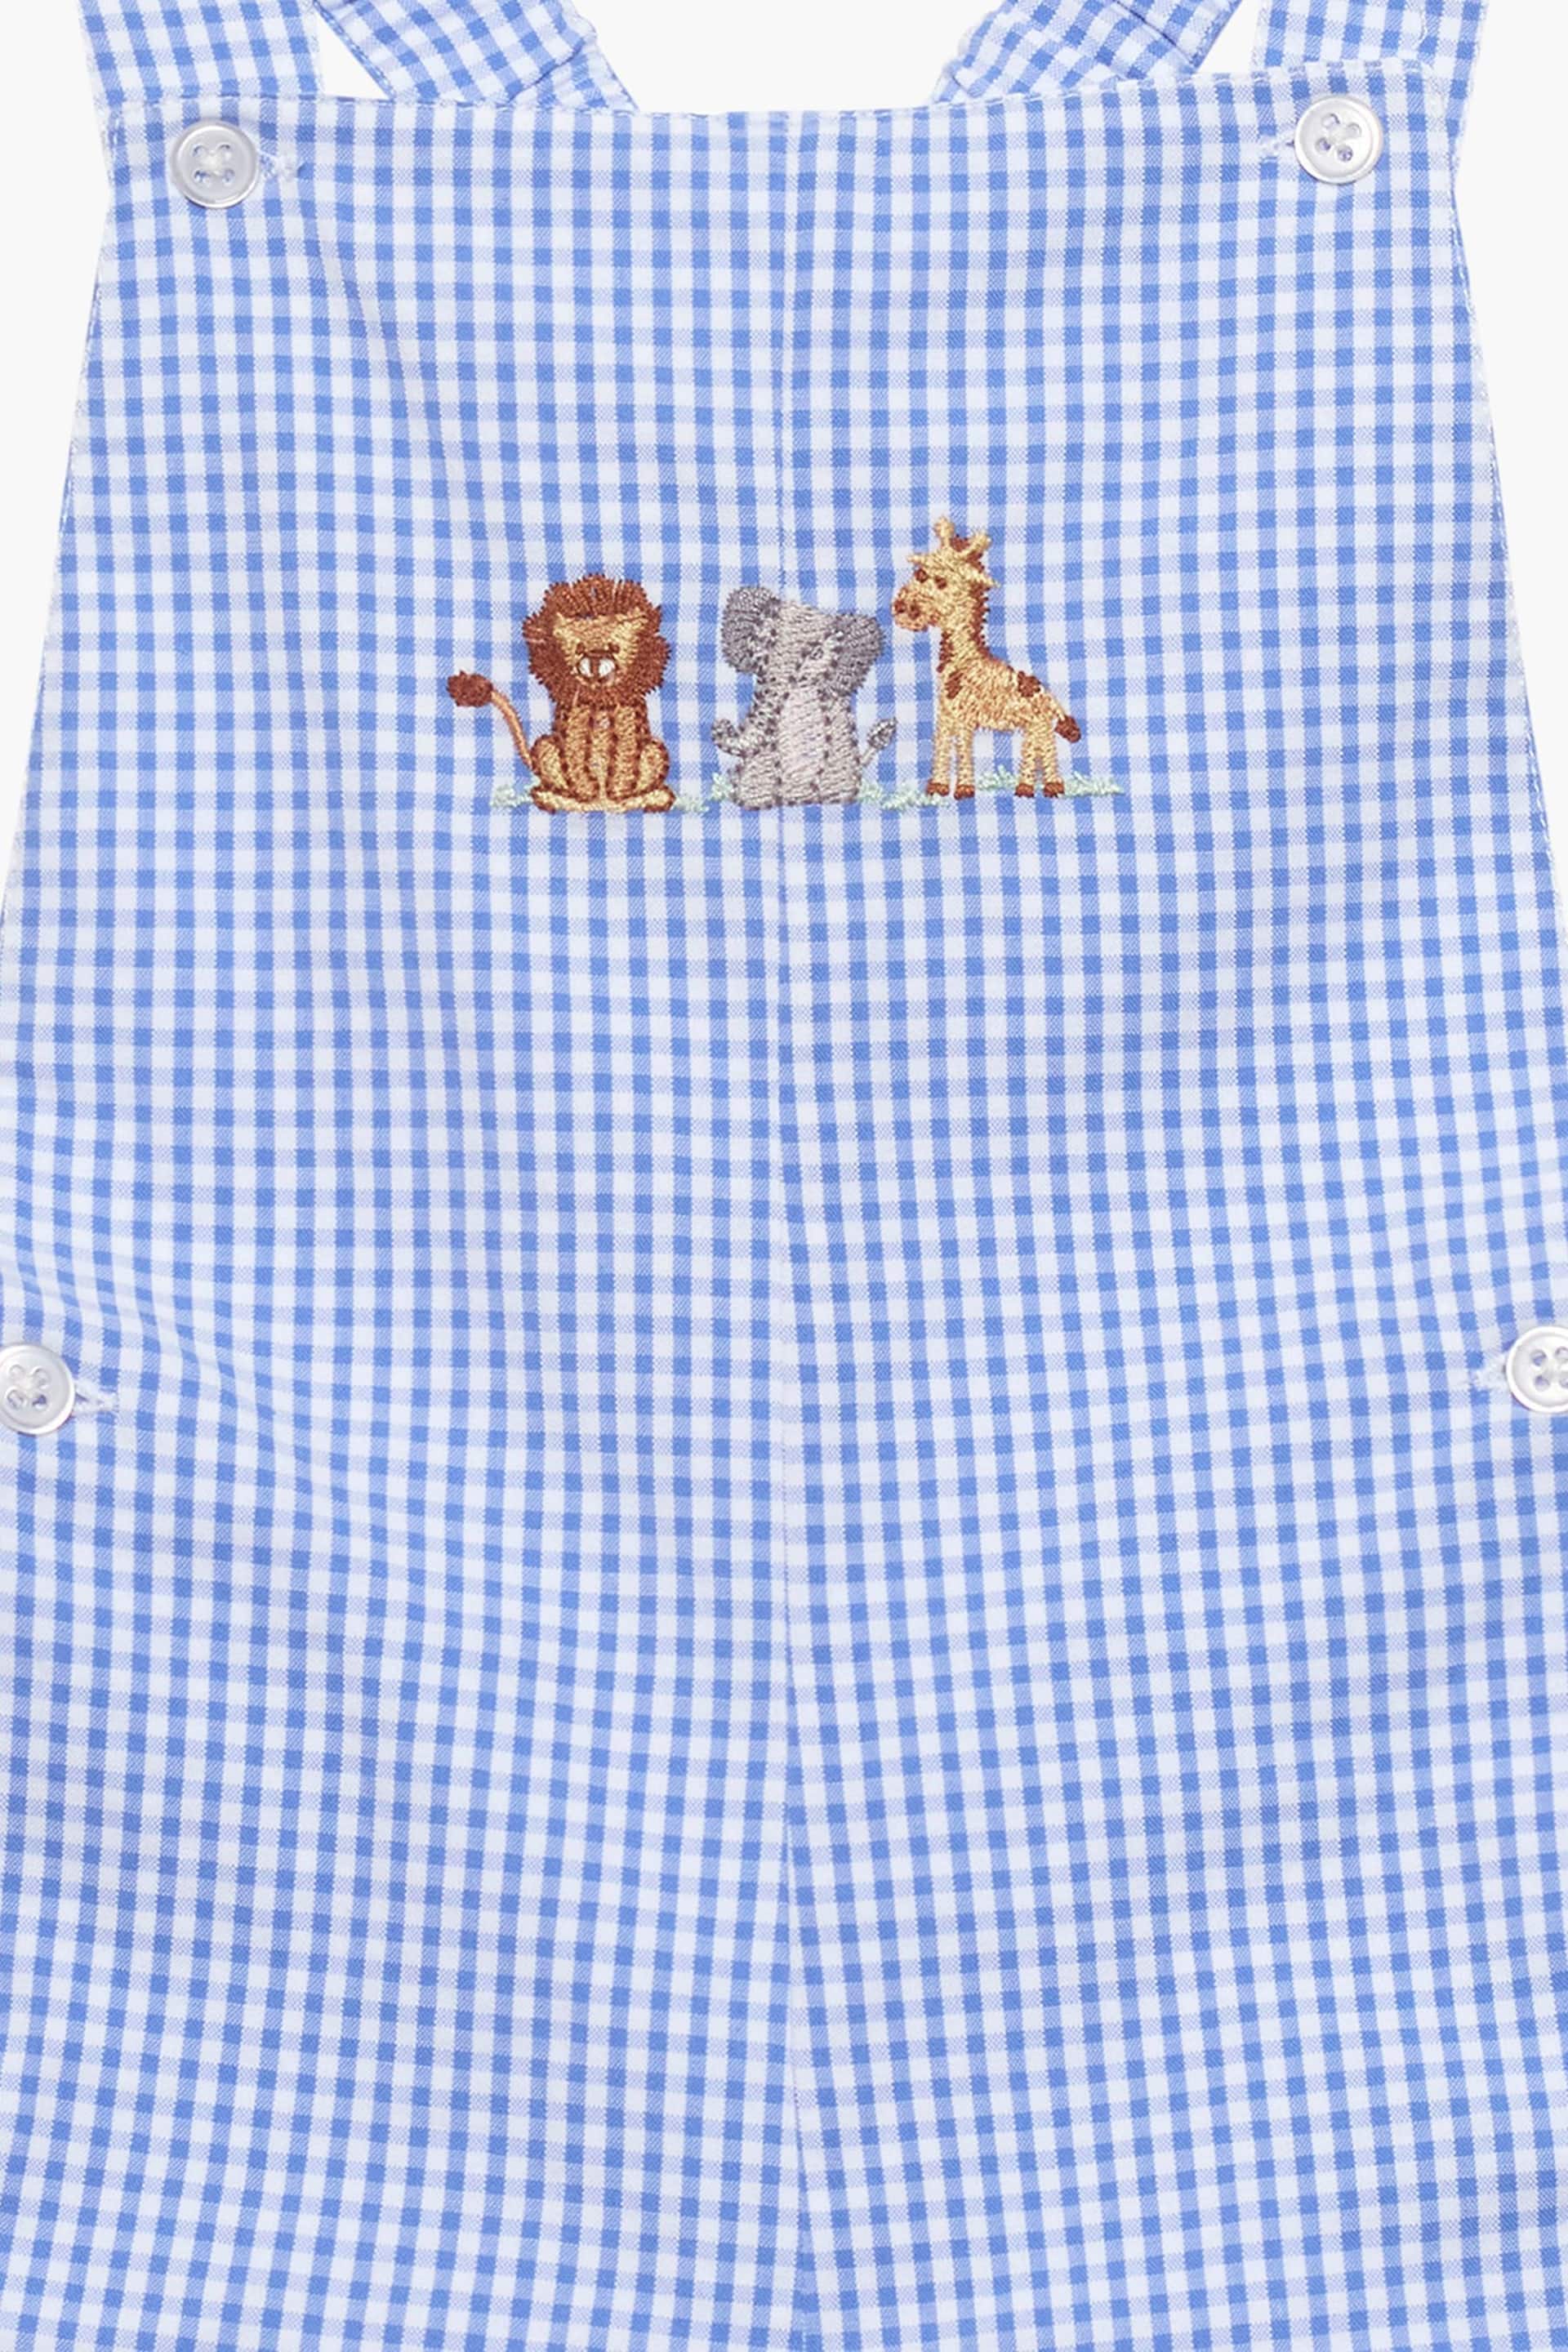 Trotters London Little Pale Gingham Augustus and Friends Alexander Bib Dungress - Image 4 of 4